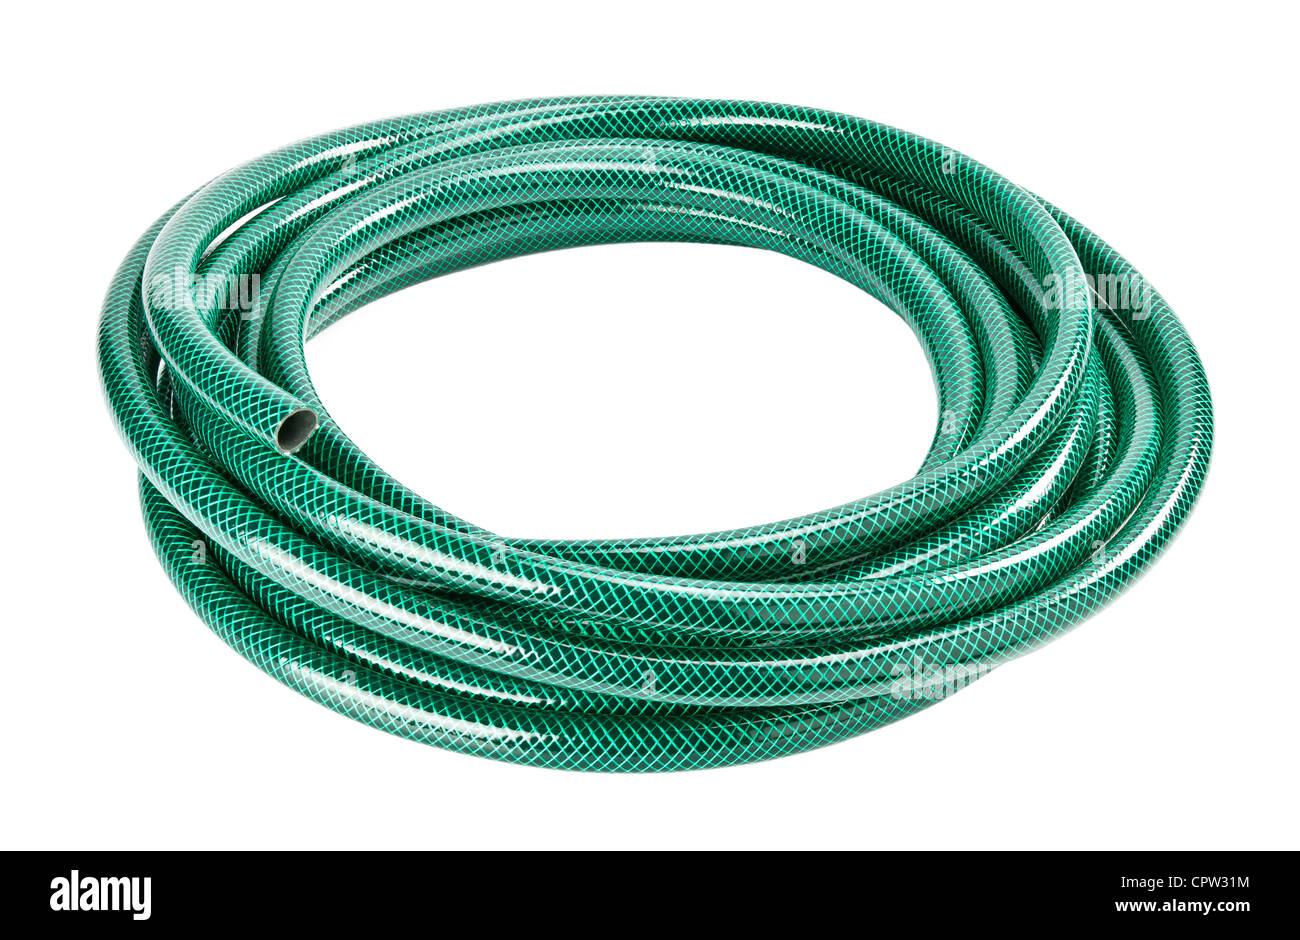 Green coiled rubber hose isolated on white Stock Photo